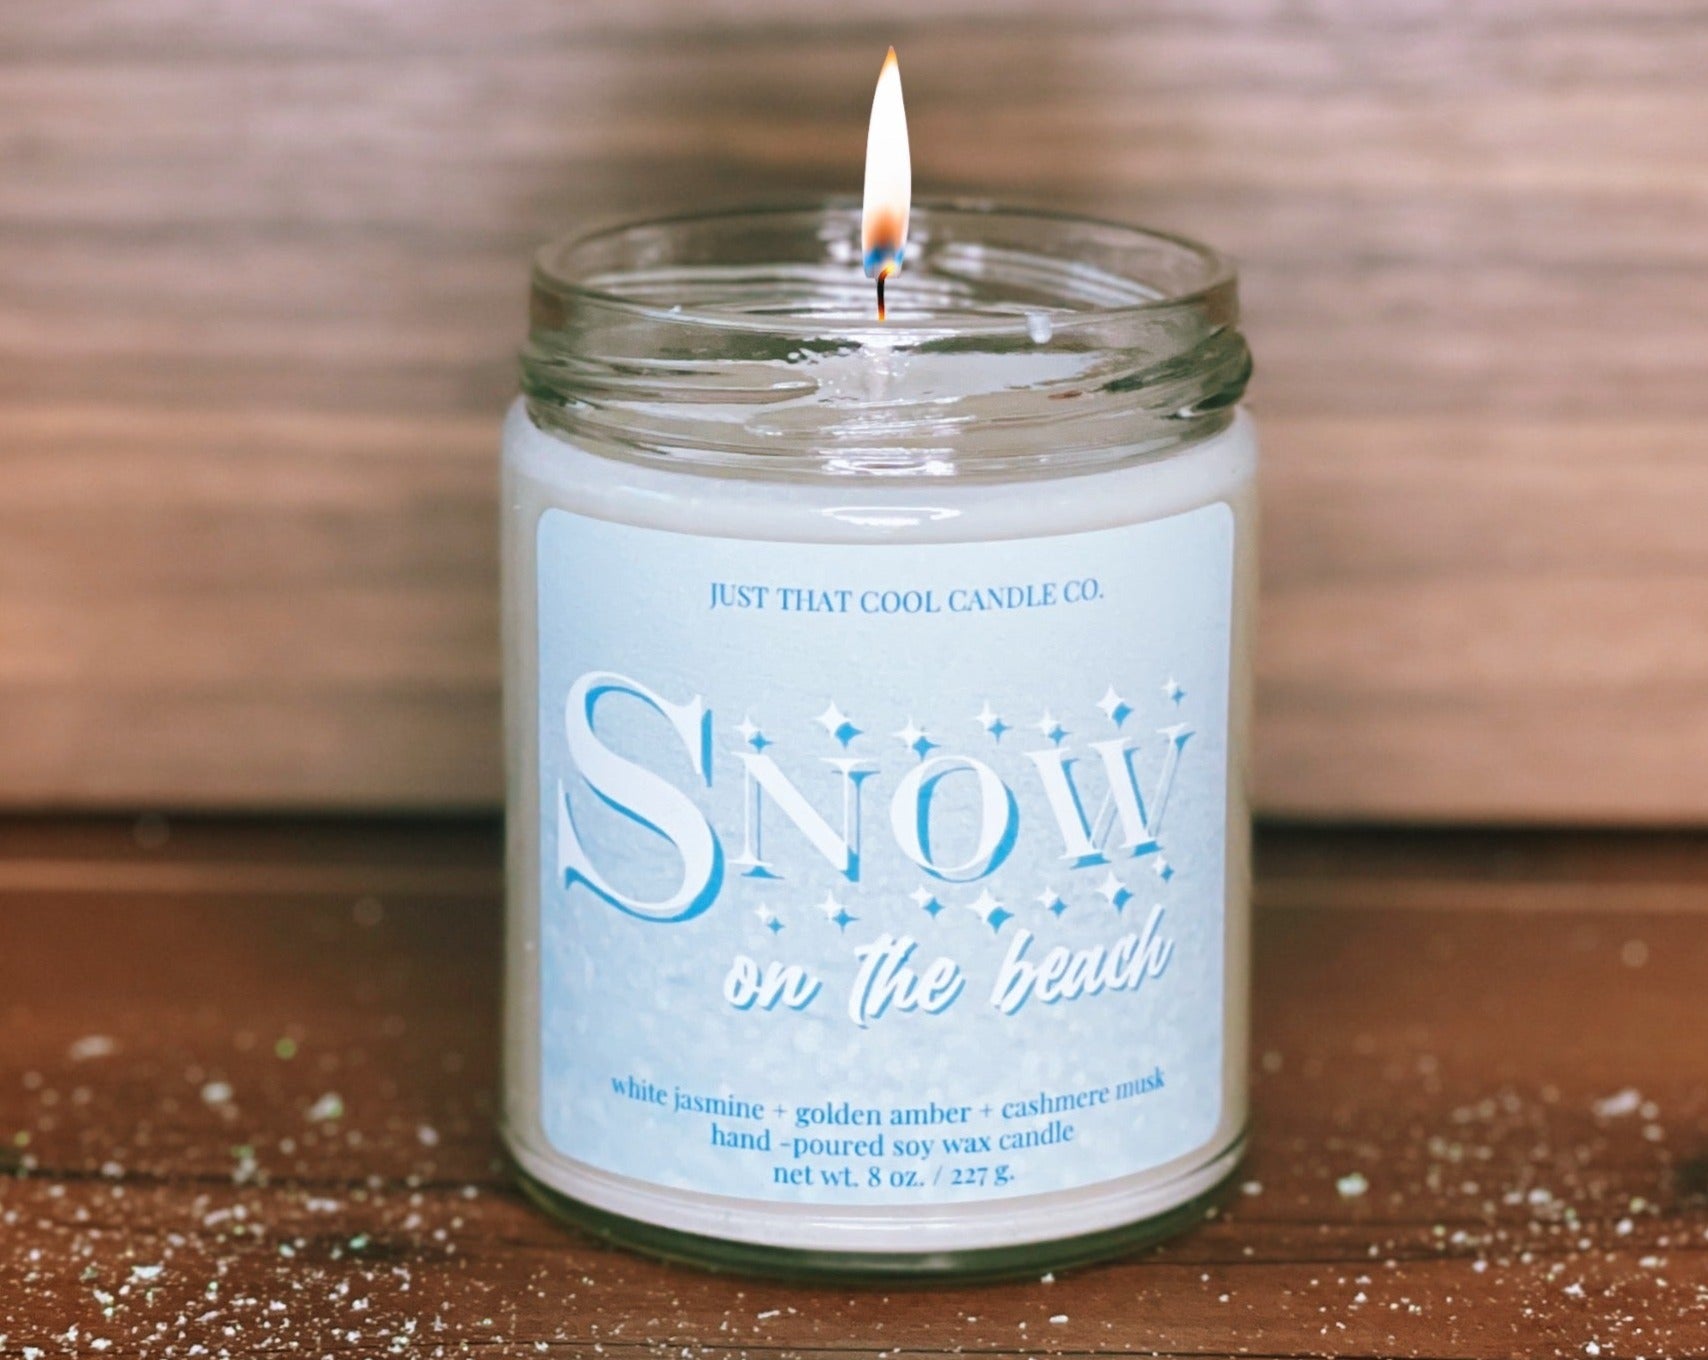 Snow on the Beach (Taylor Swift Inspired Candle)